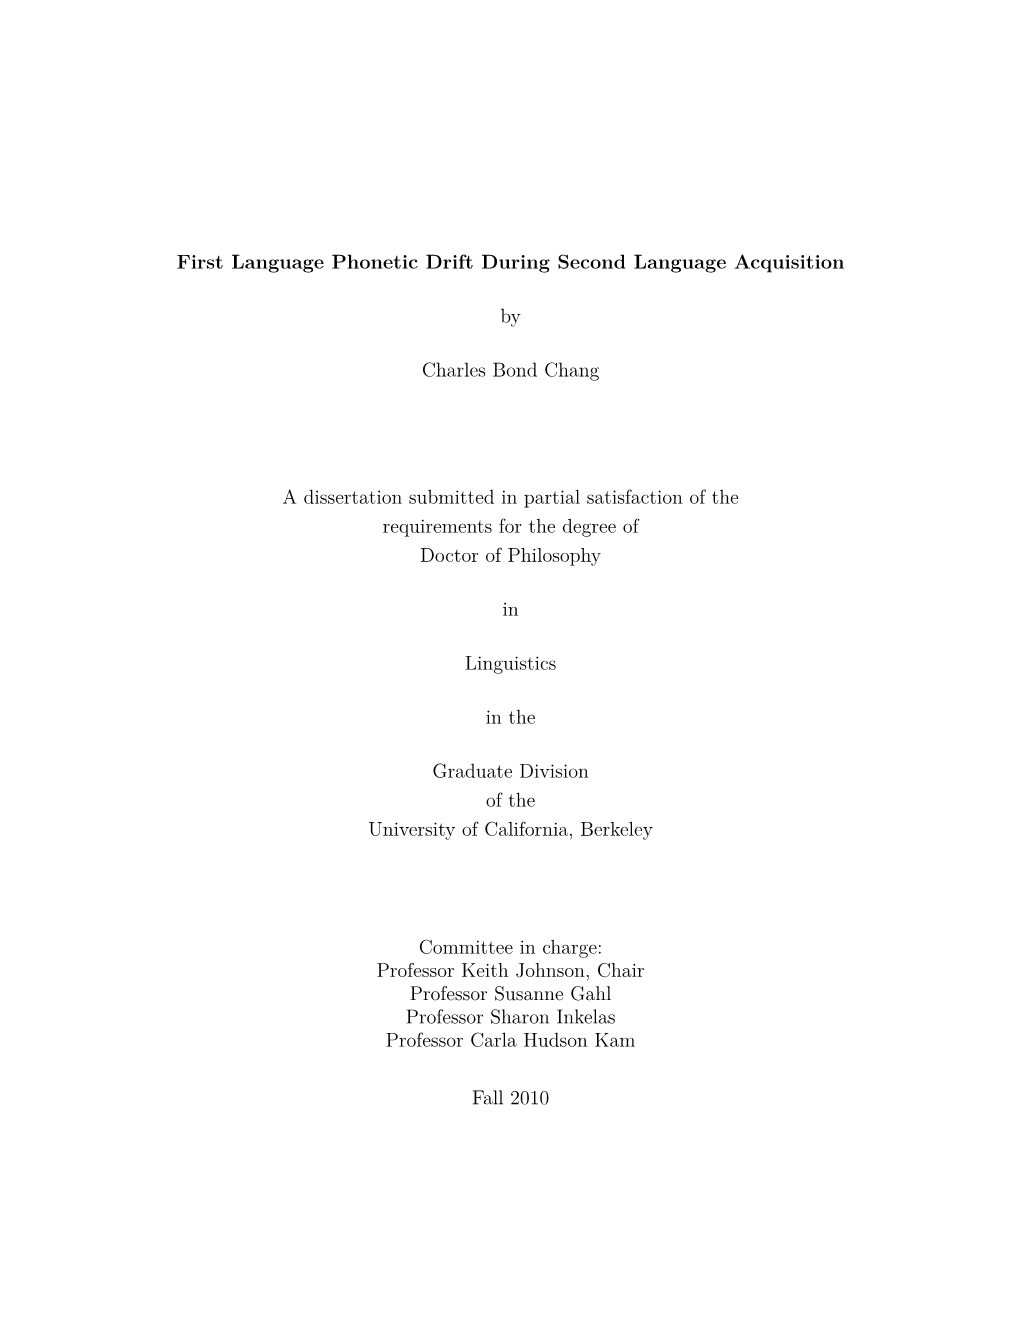 First Language Phonetic Drift During Second Language Acquisition By